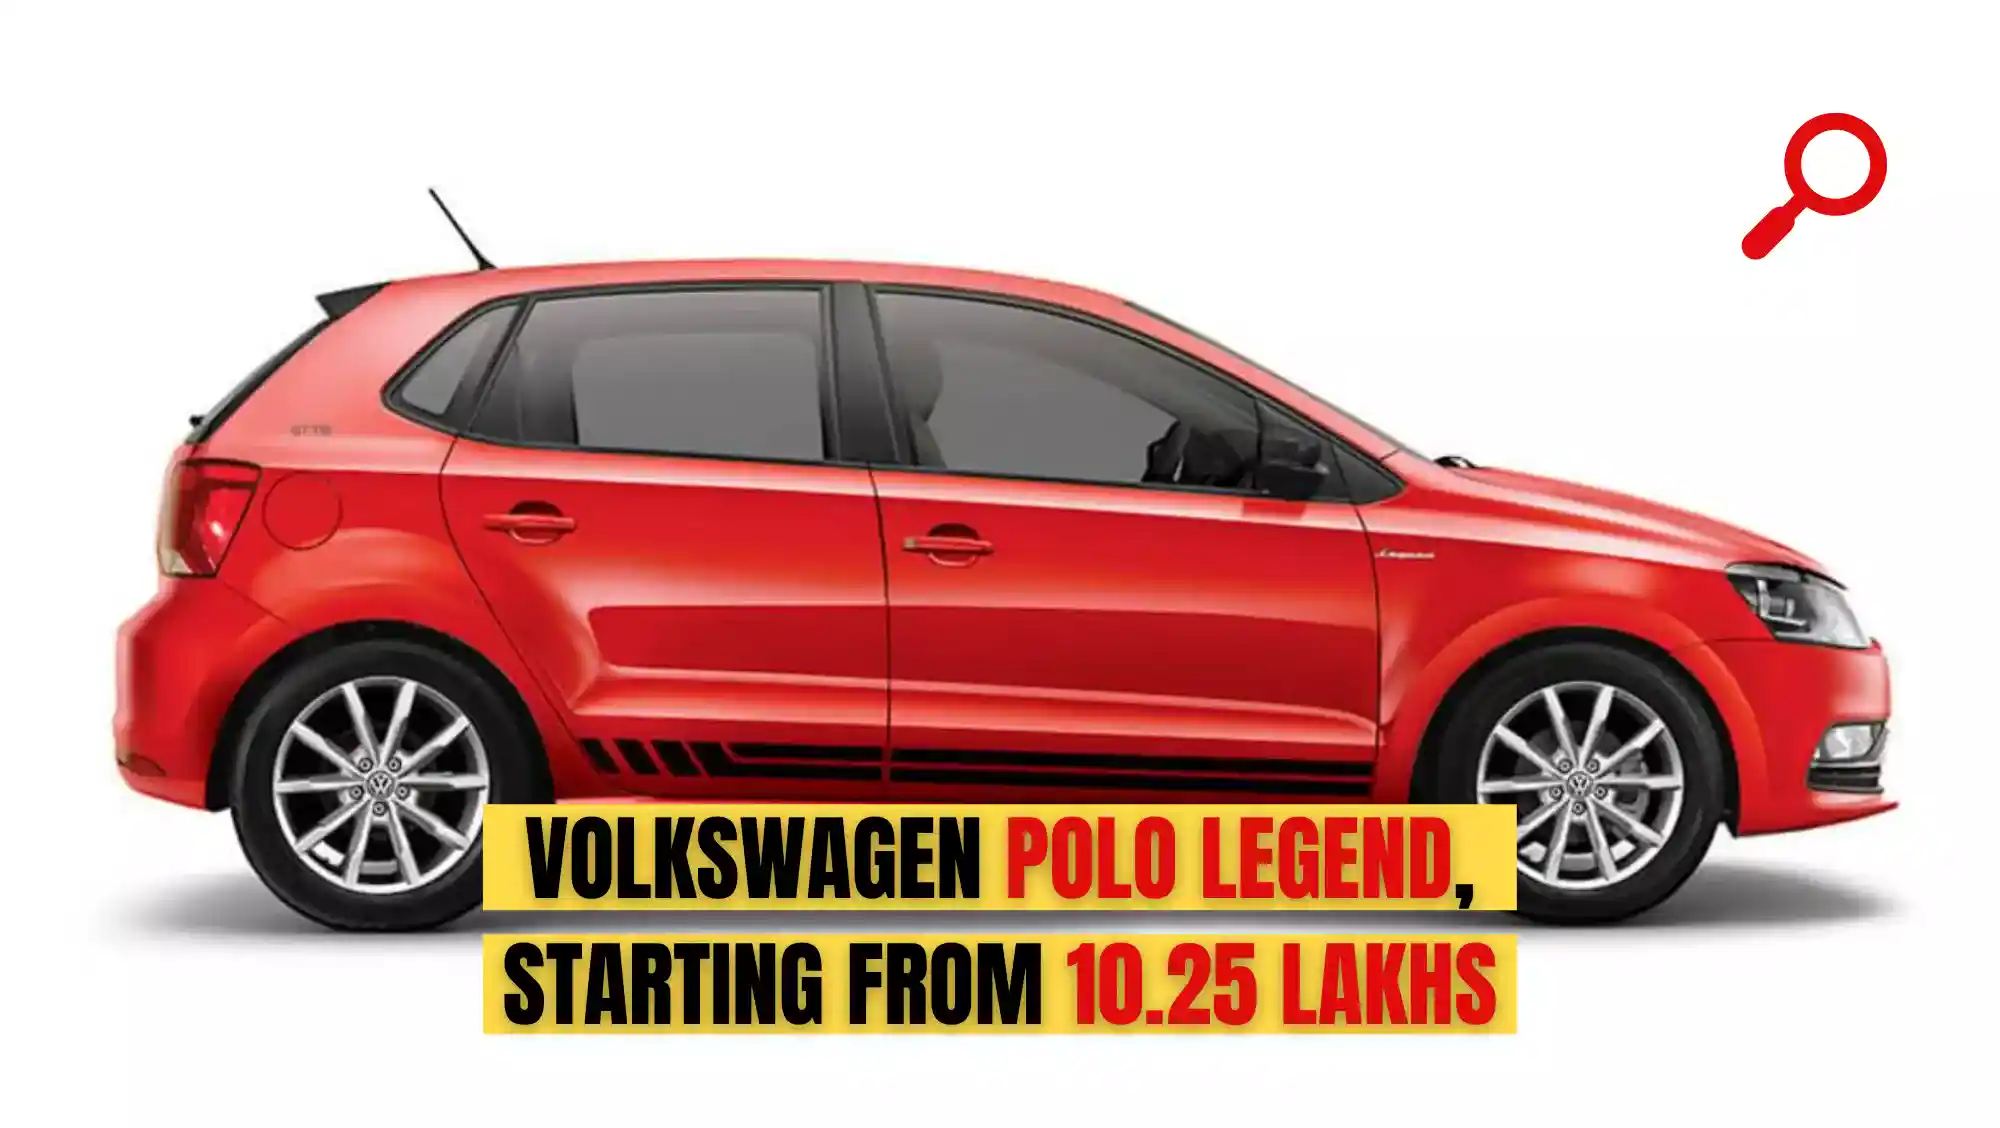 Volkswagen Polo Legend Edition launched in India, starting from 10.25 lakhs